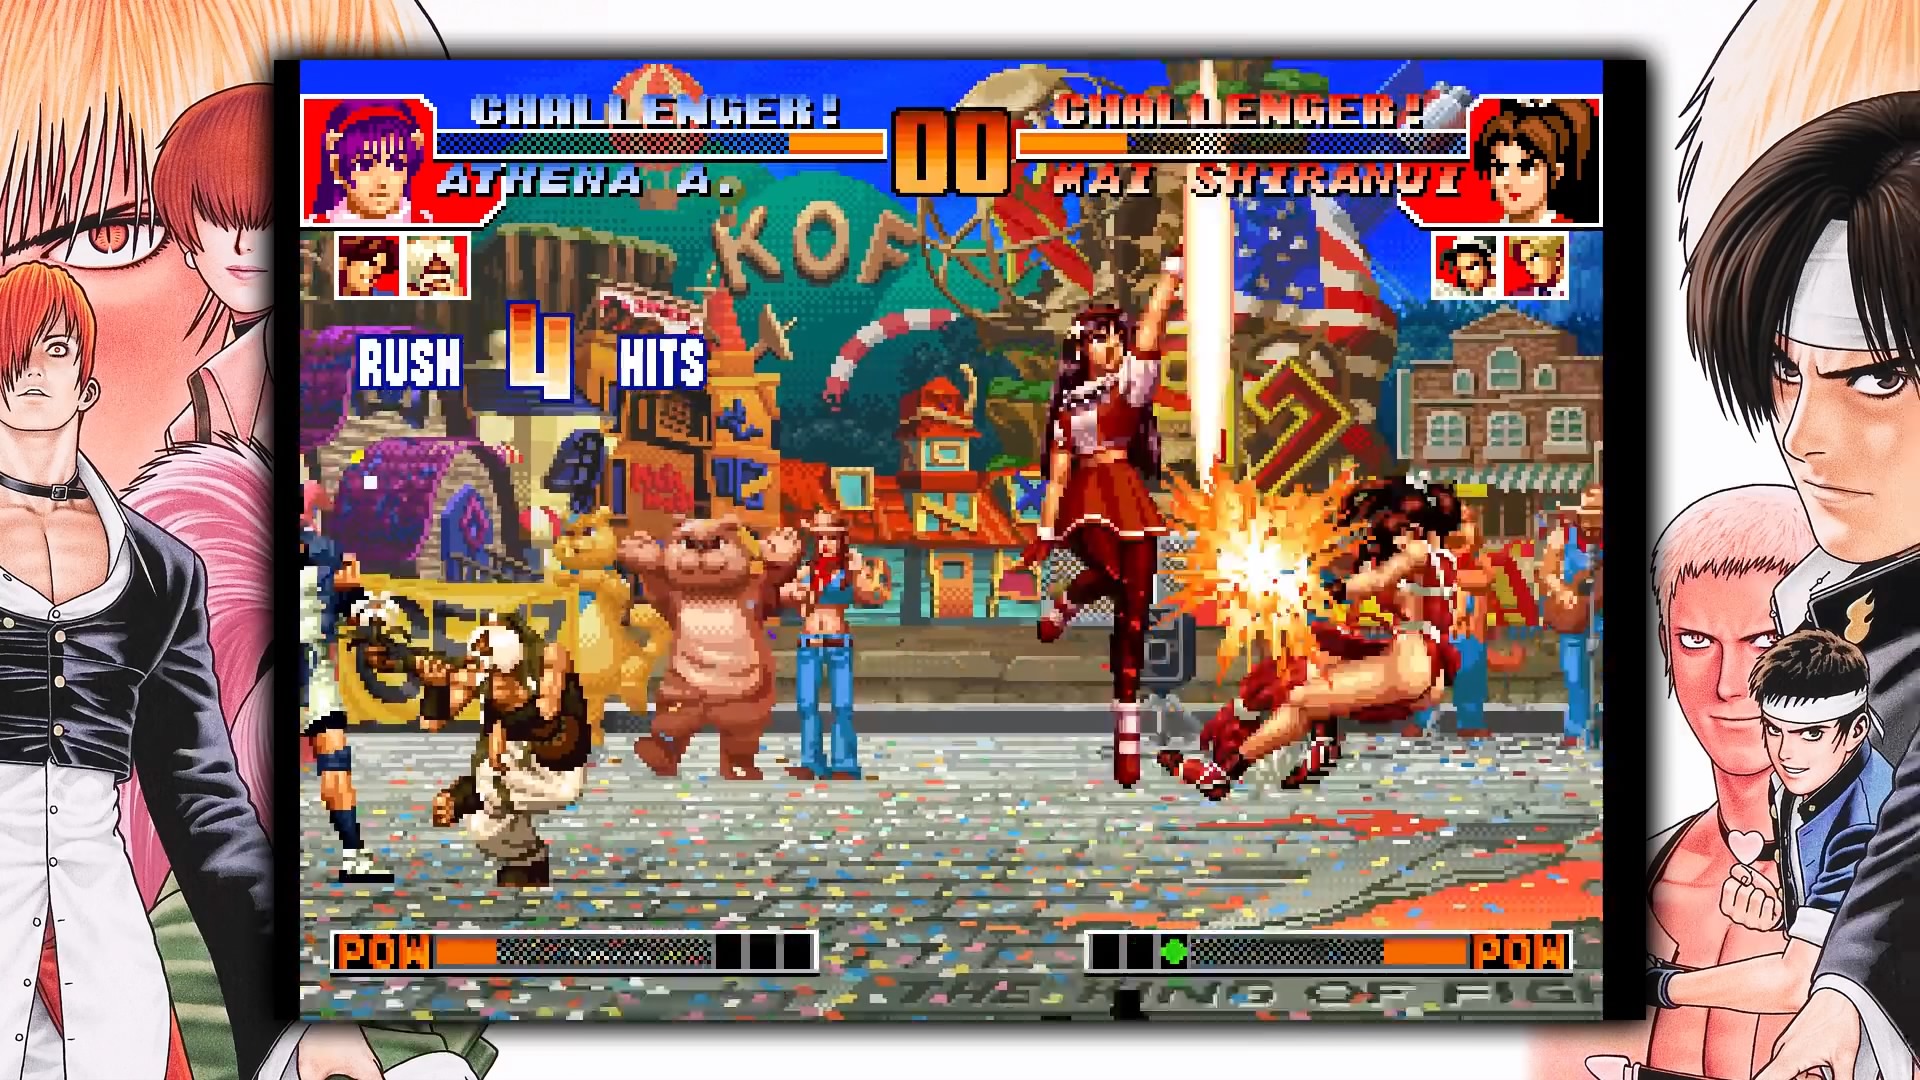 the king of the fighters 97 ol